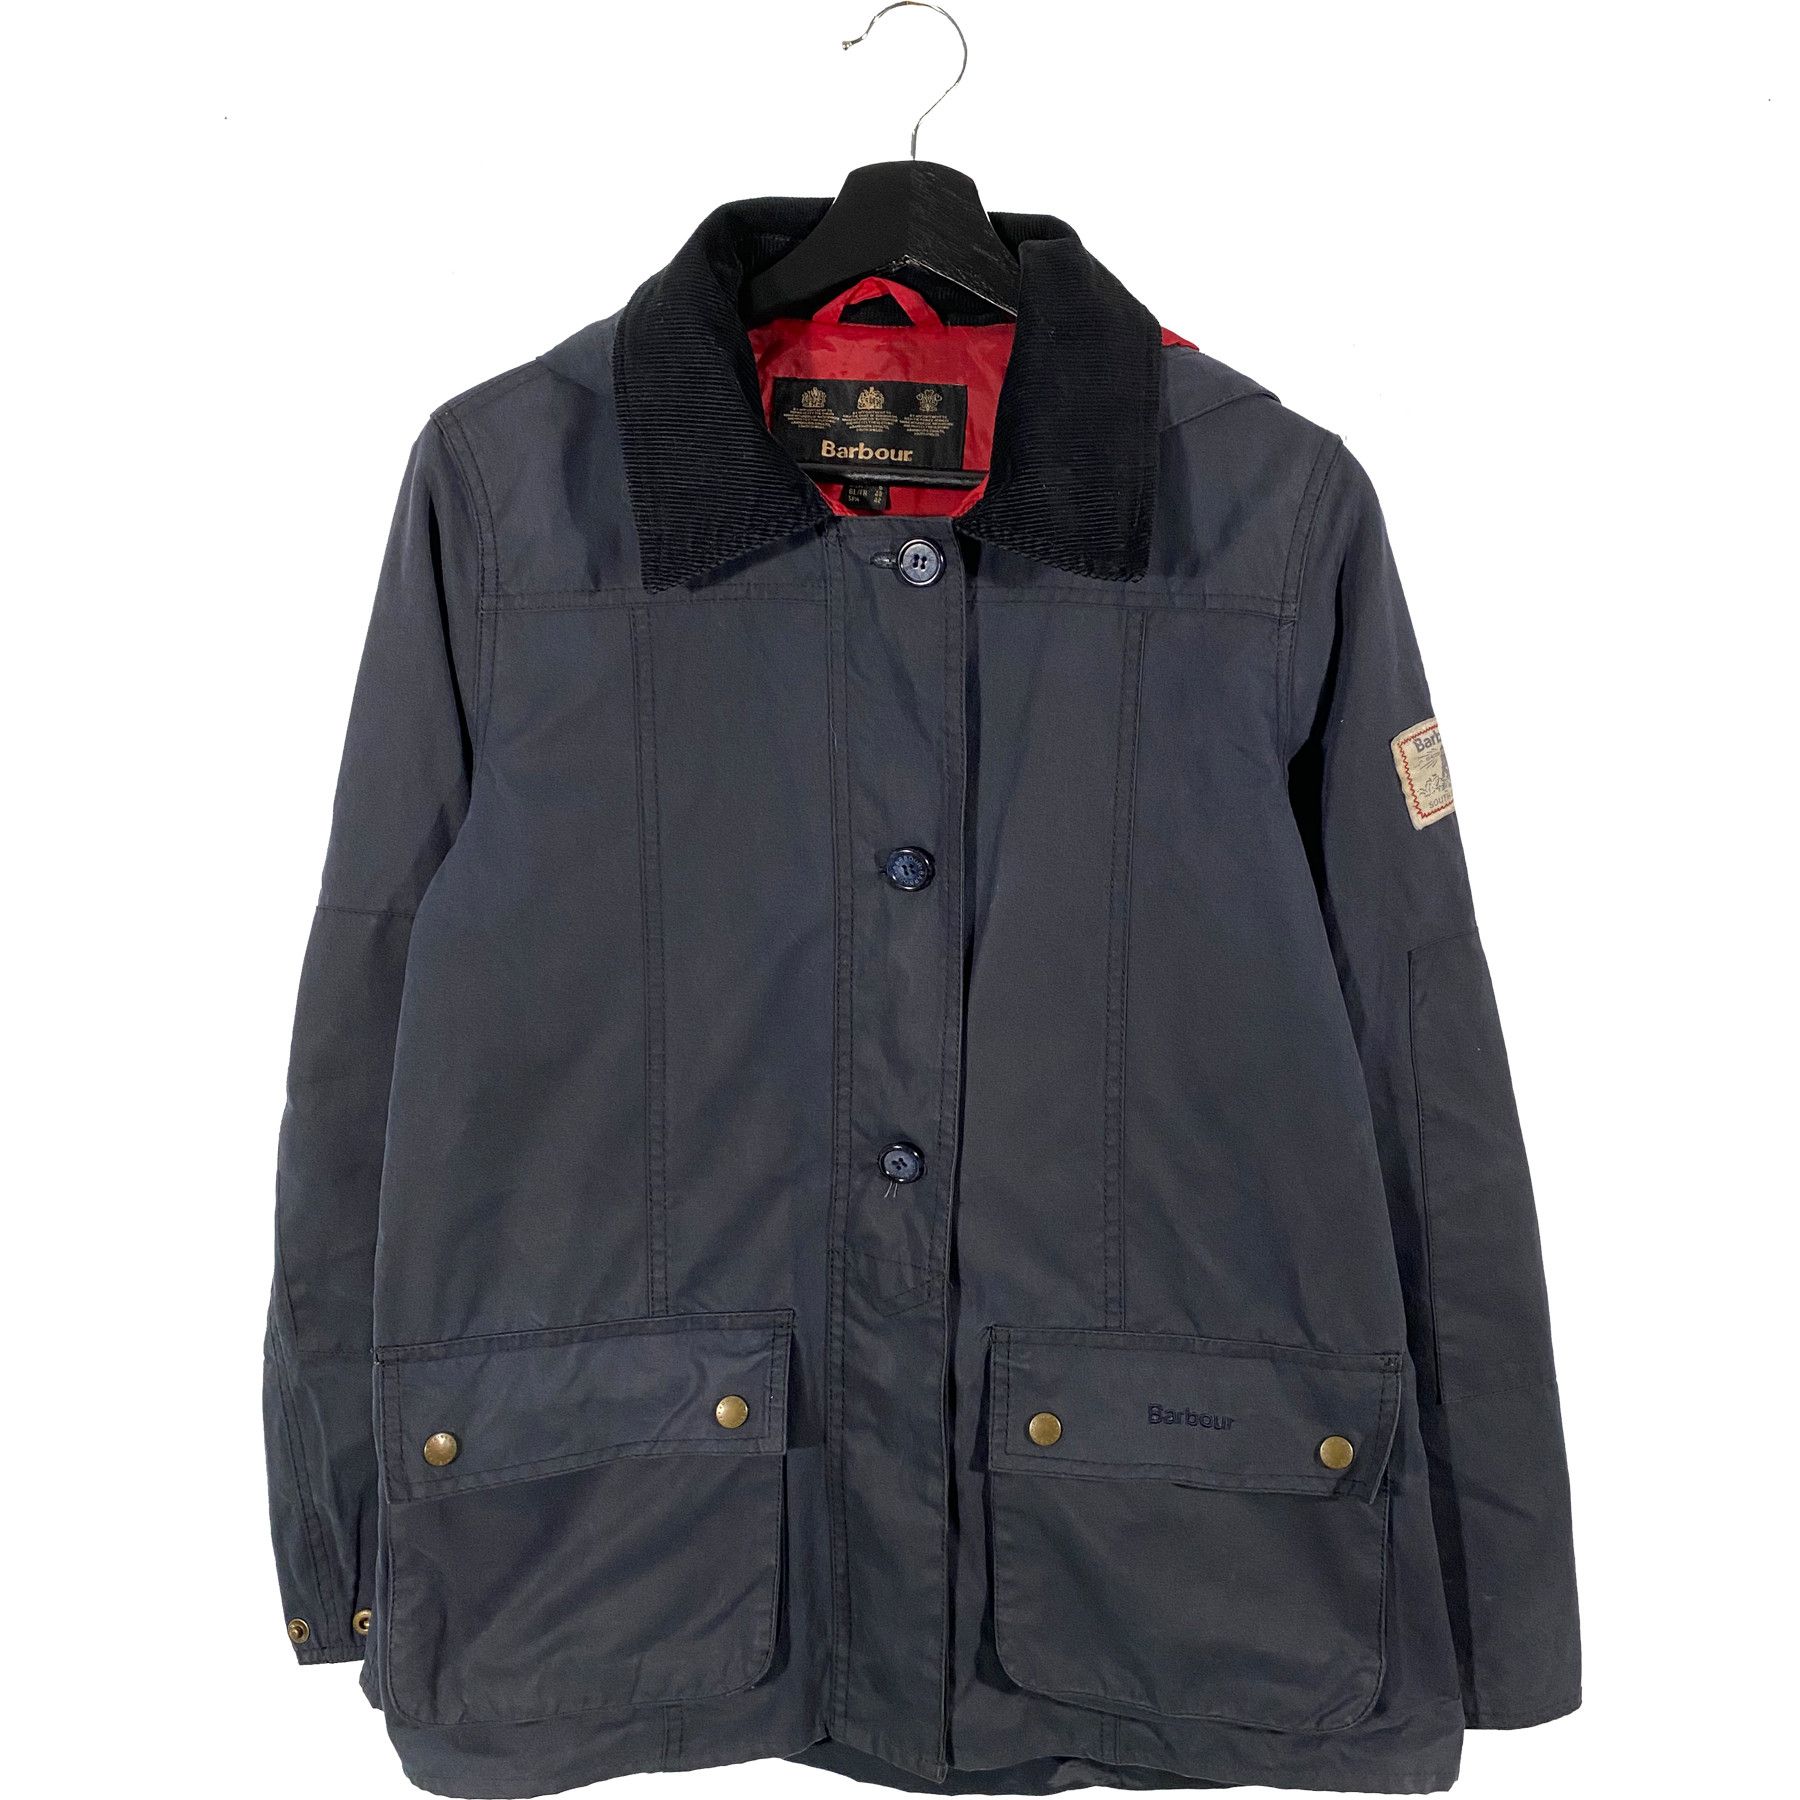 Barbour Vintage Barbour Waxed Cotton Jacket Made in Bulgaria | Grailed